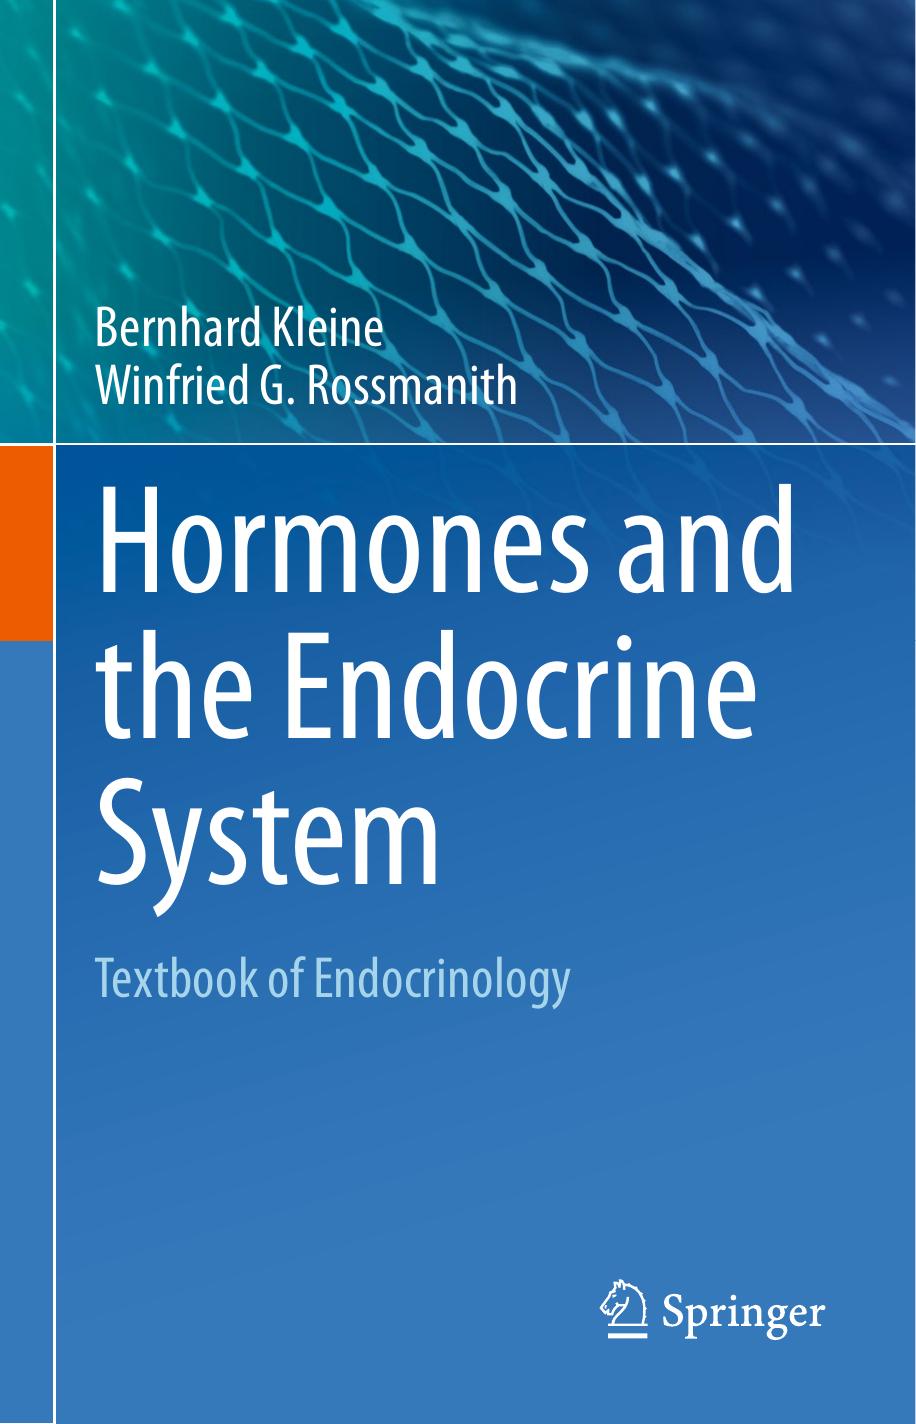 Hormones and the Endocrine System Textbook of Endocrinology 2016